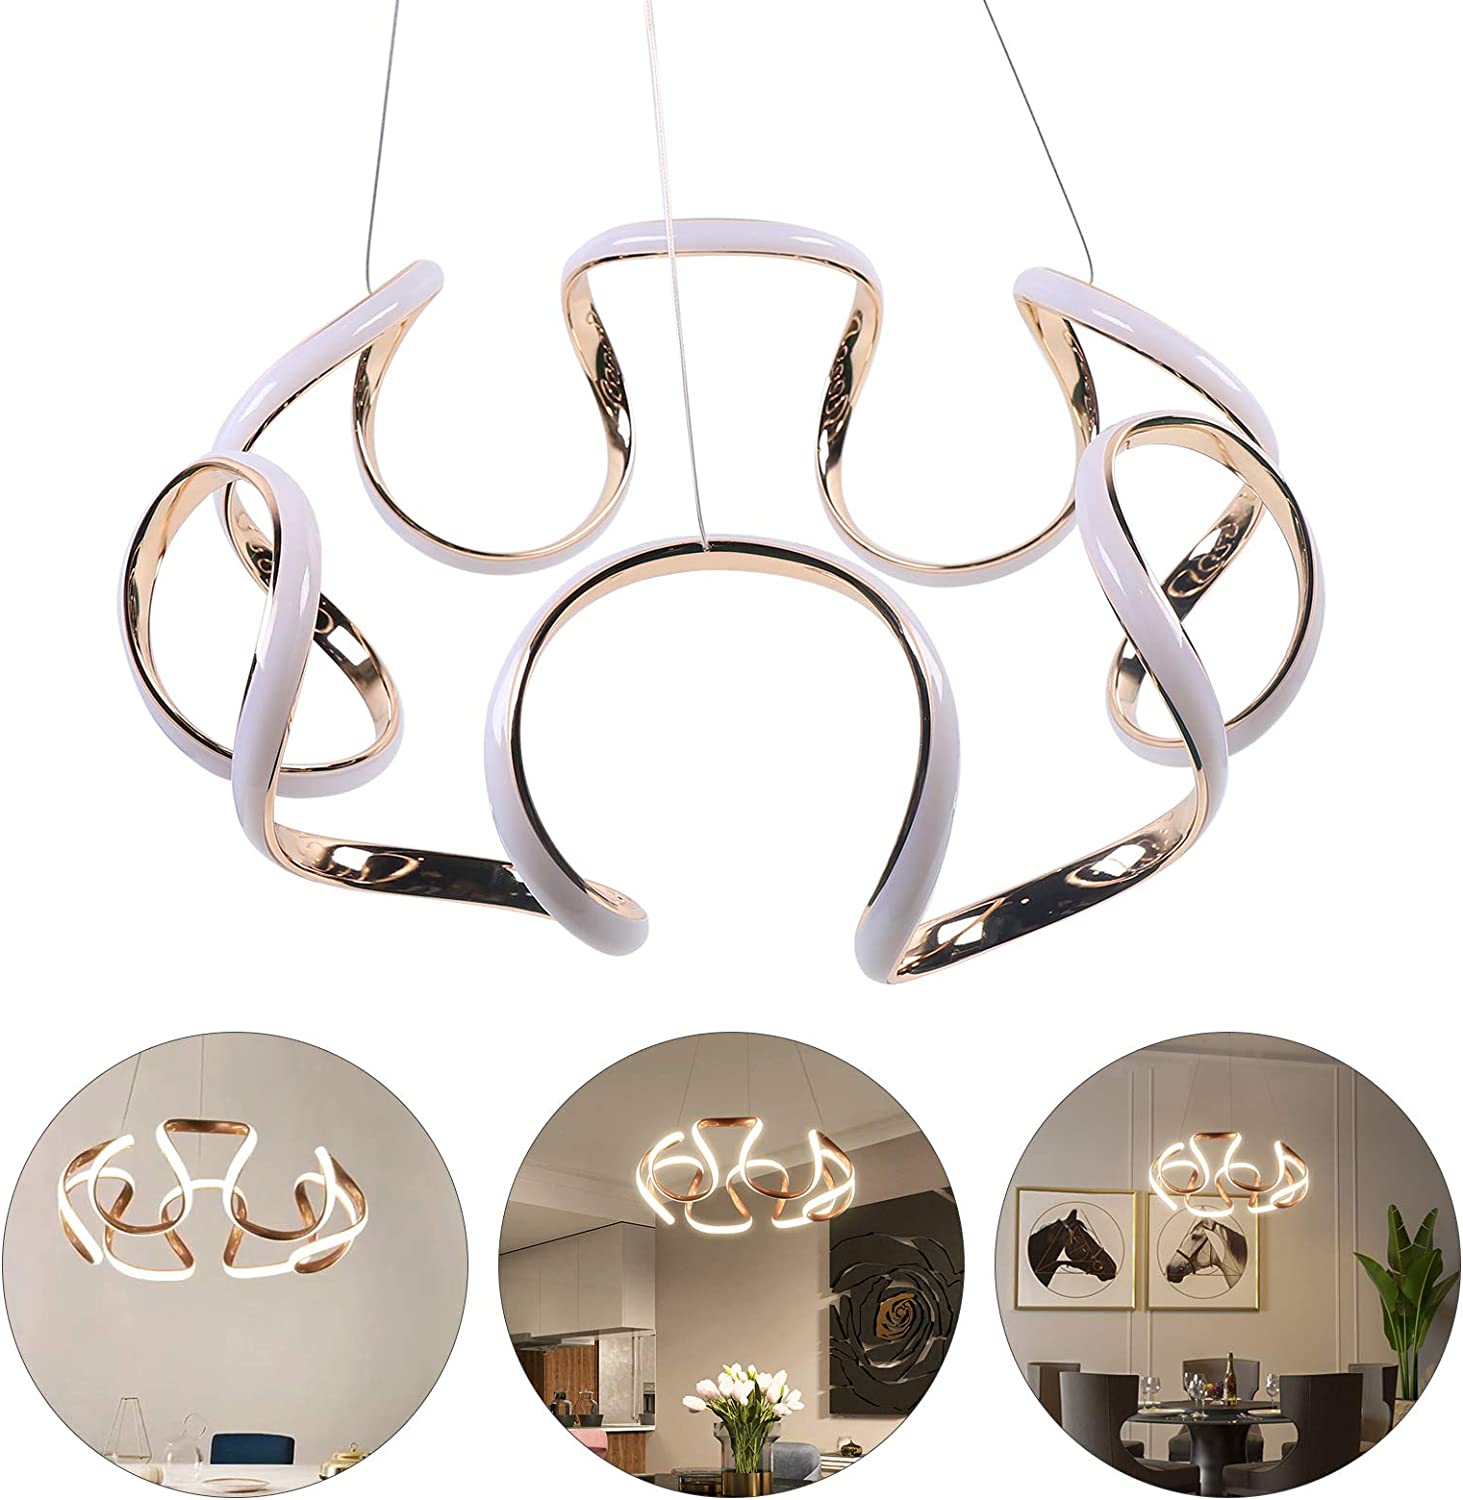 MONIPA LED Ceiling Light Fixture Modern Champagne Gold Pendant Light Stepless Dimming with Remote Control for Living Room Dining Kitchen Bar Table Lamp - image 5 of 7